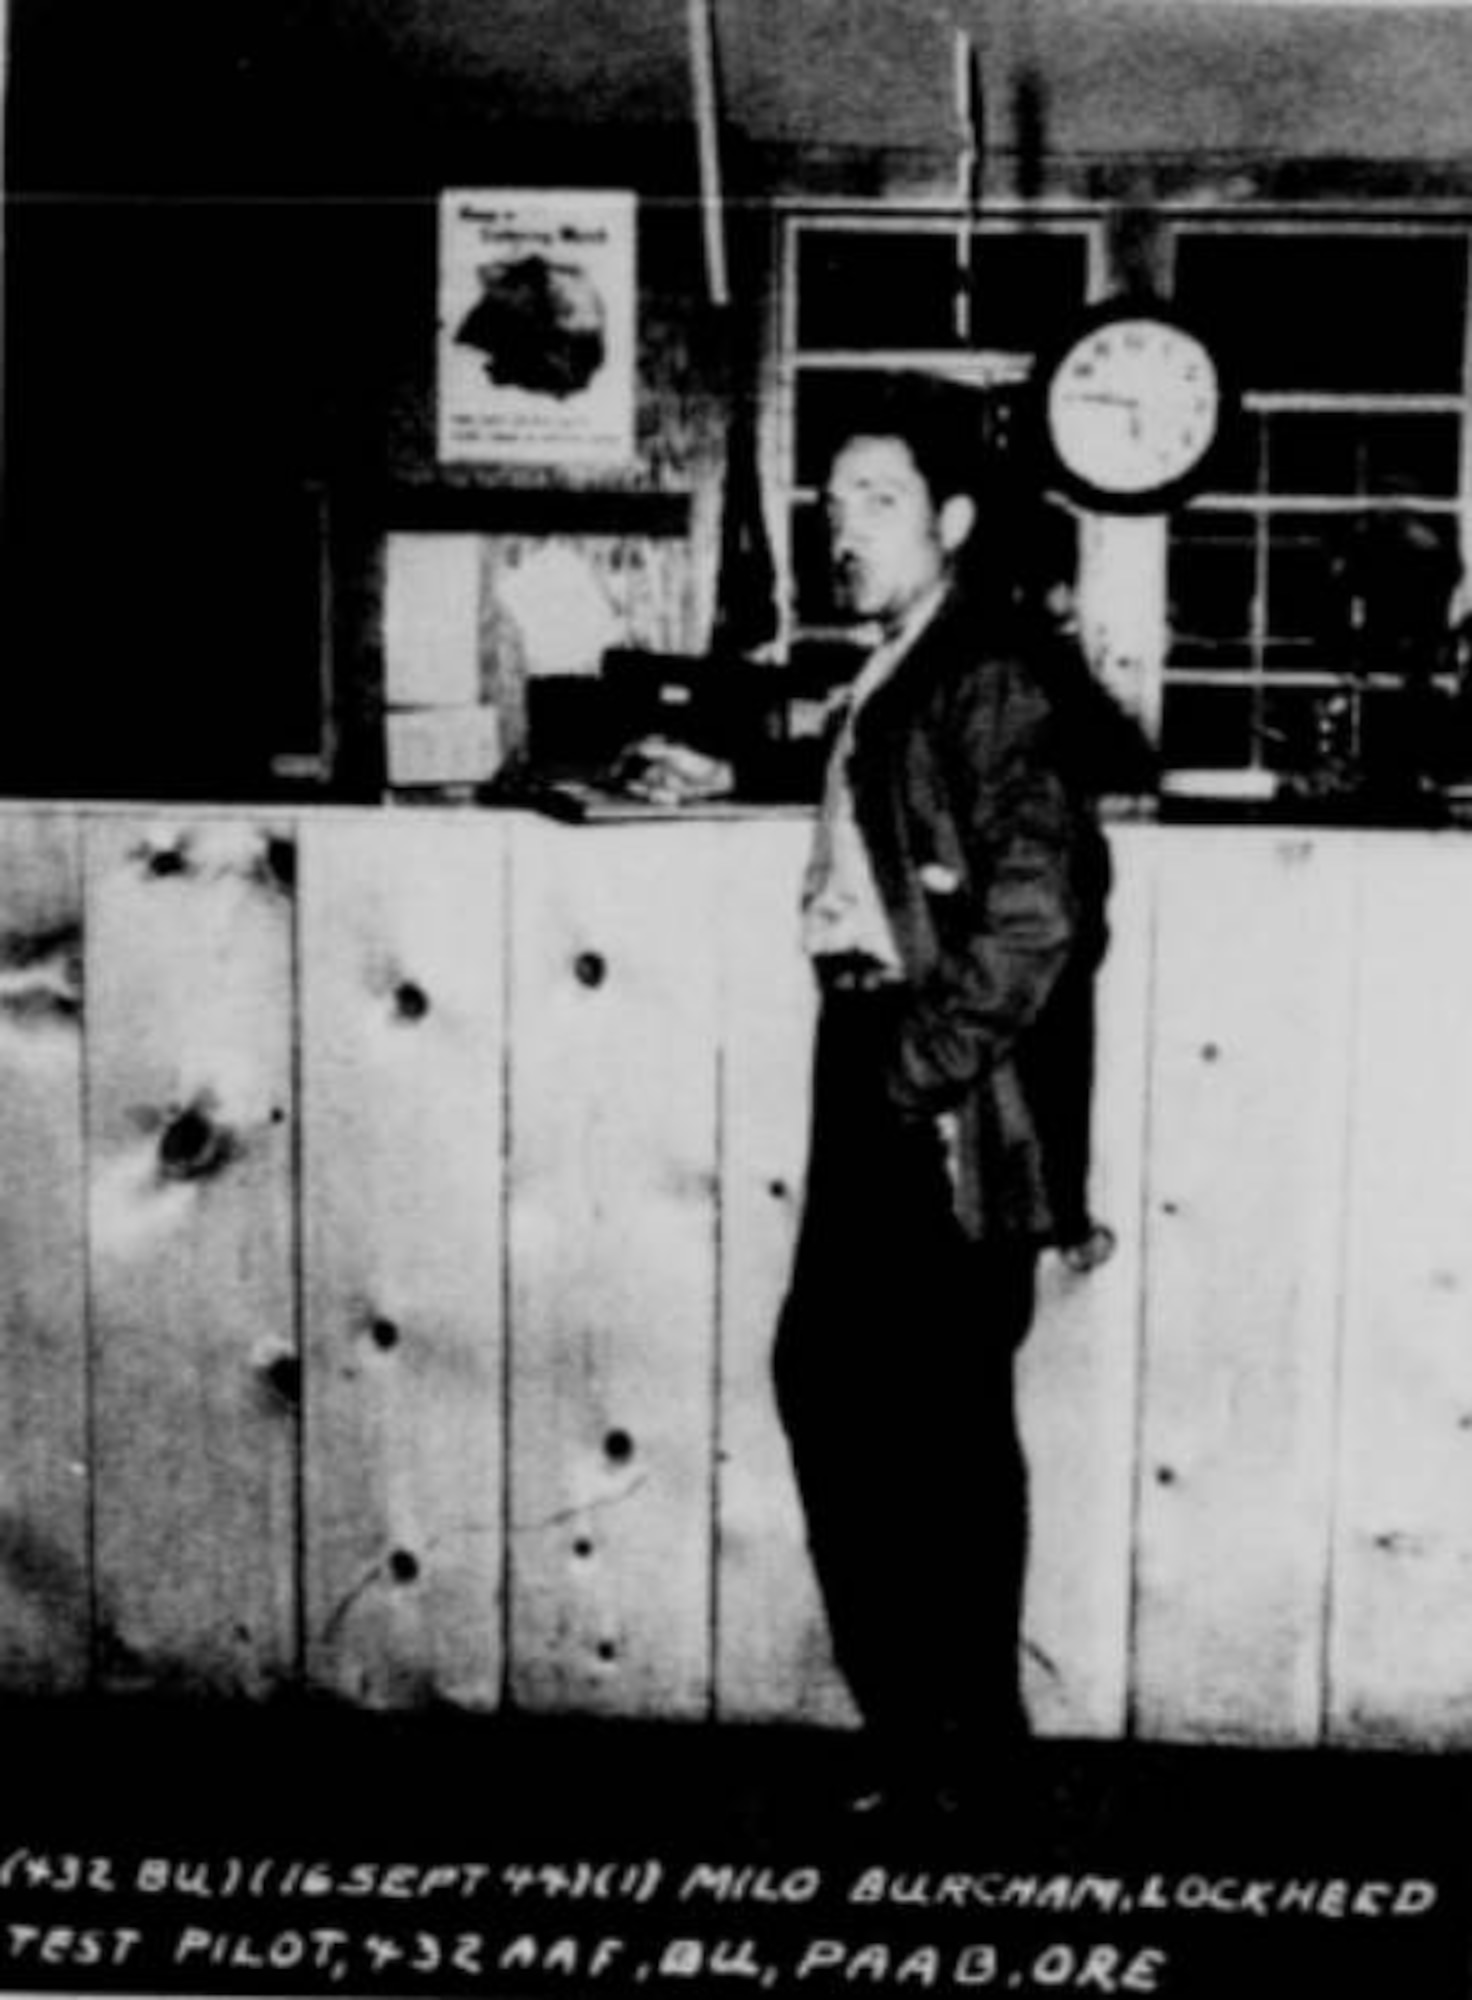 Pictured here is Milo Burcham, Lockheed’s ace test pilot, as he stands at the counter of PAAB’s operations building.  On September 16, 1944, Burcham, flying a P-38 with incredible ease and skill, put his ship through some of the most difficult maneuvers in flying in a flight over the Portland Army Air Base.  Besides being tremendously exciting, his flight proved to be an invaluable source of inspiration to the pilot trainees of the 432nd Army Air Force Base Unit who would soon be flying P-38’s exclusively.  He demonstrated the peak performance that the P-38 could attain.  (U.S. Air Force photo)